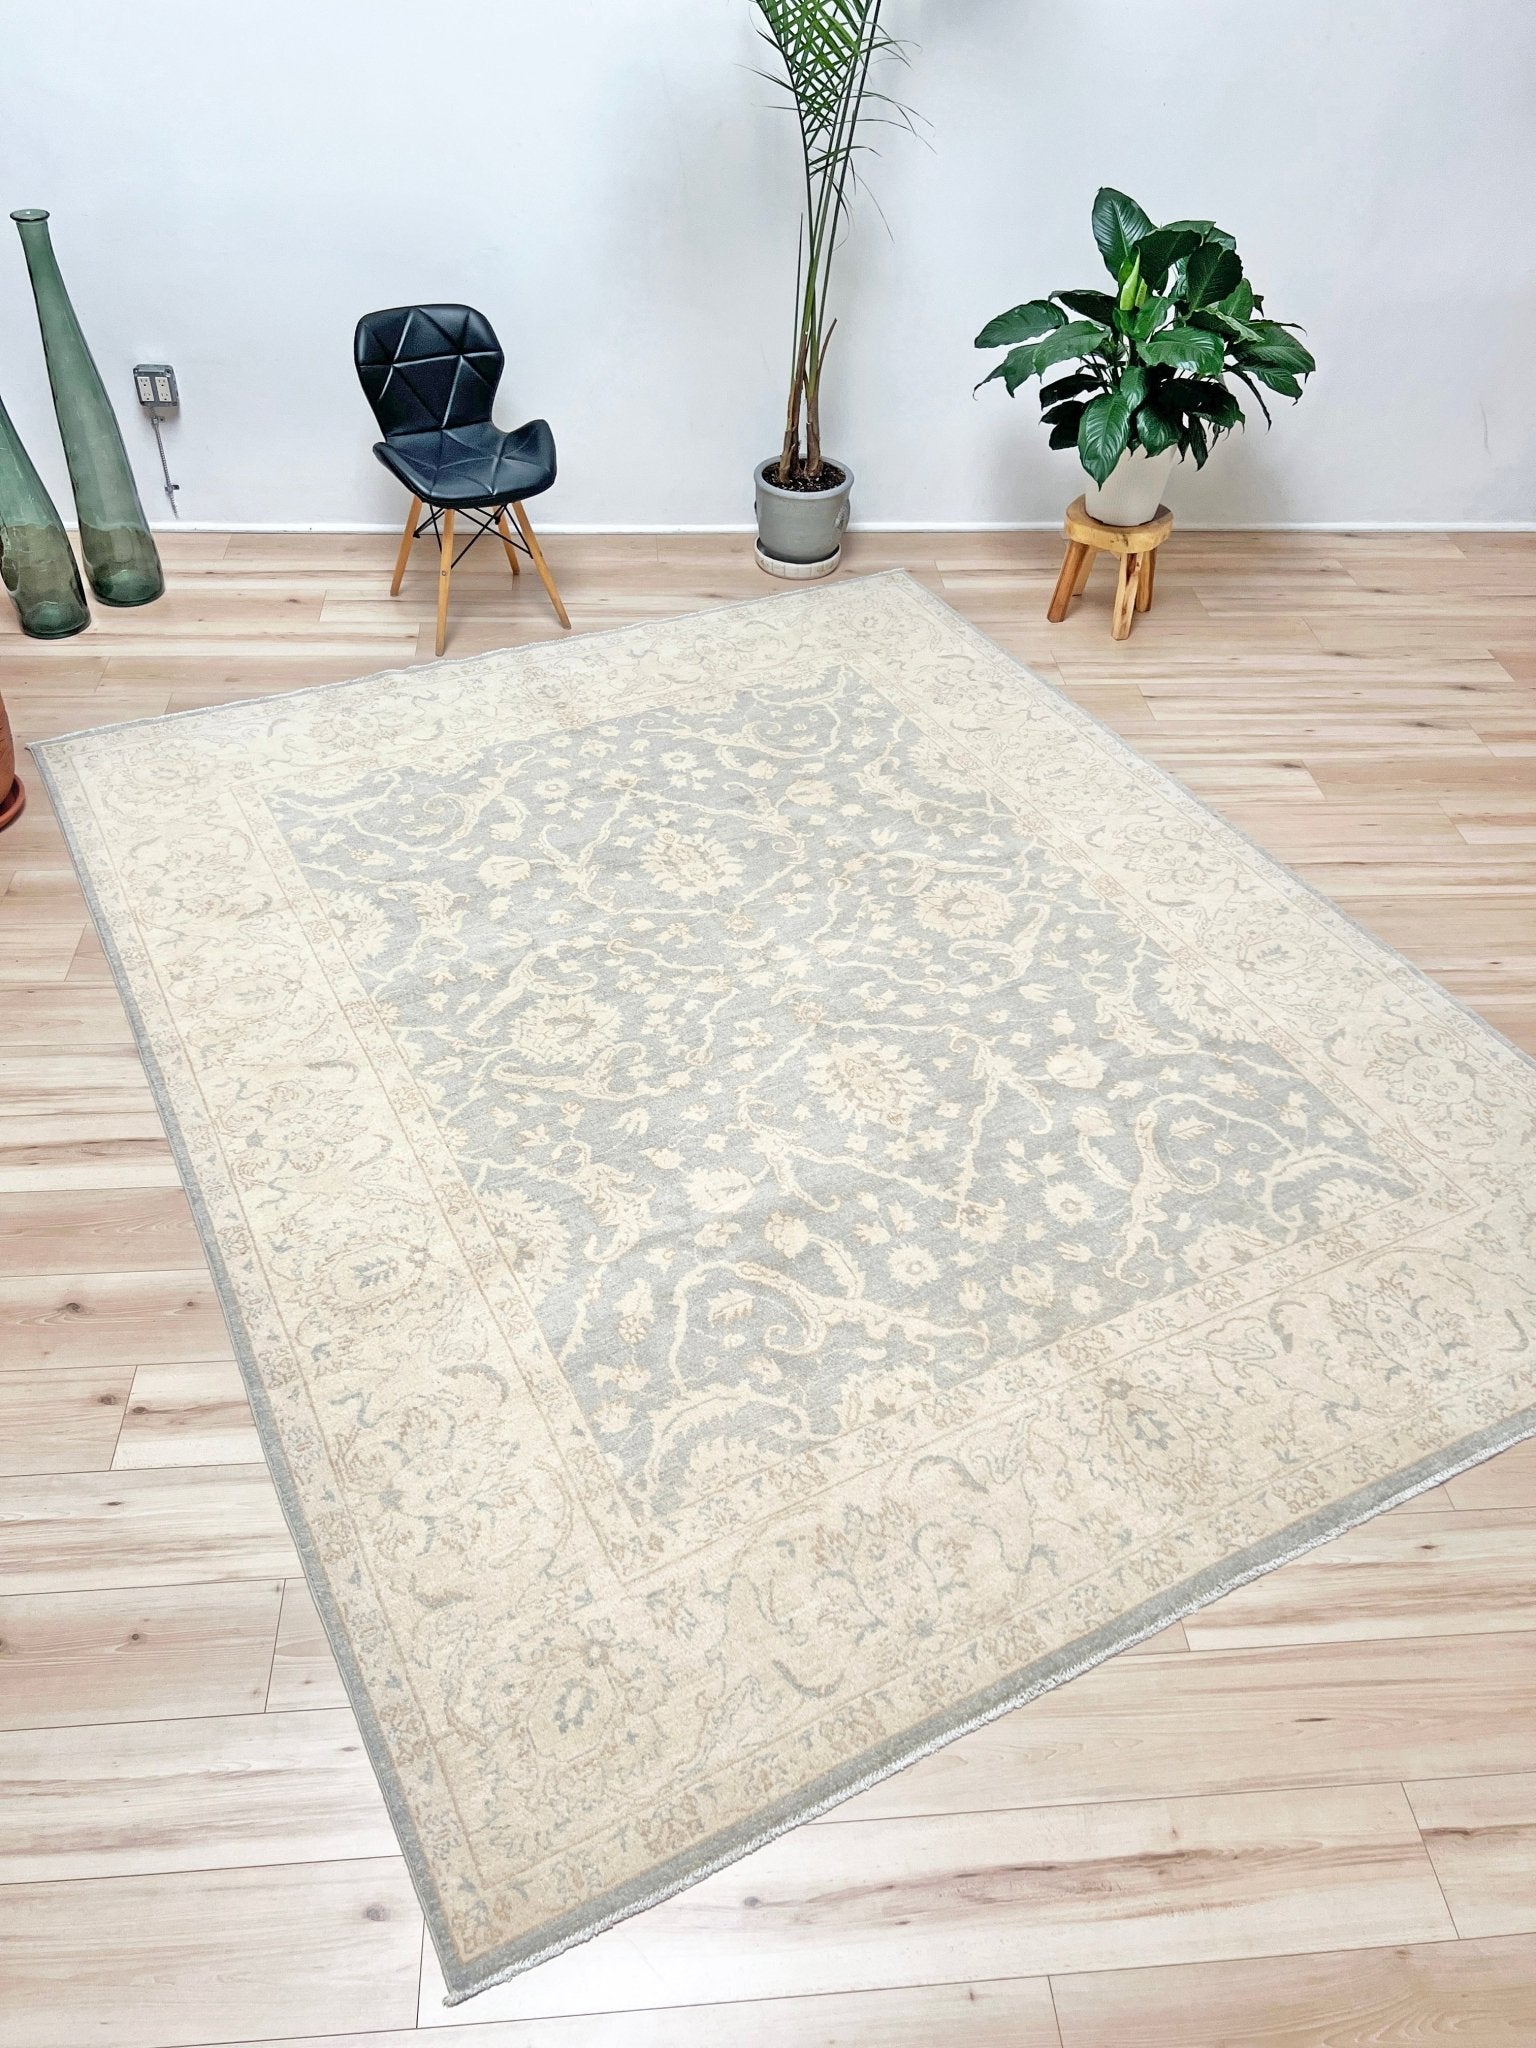 Oushak 8x6 handmade wool oriental rug shop san francisco bay area. Buy exquisite quality rug online Free shipping USA Canada.